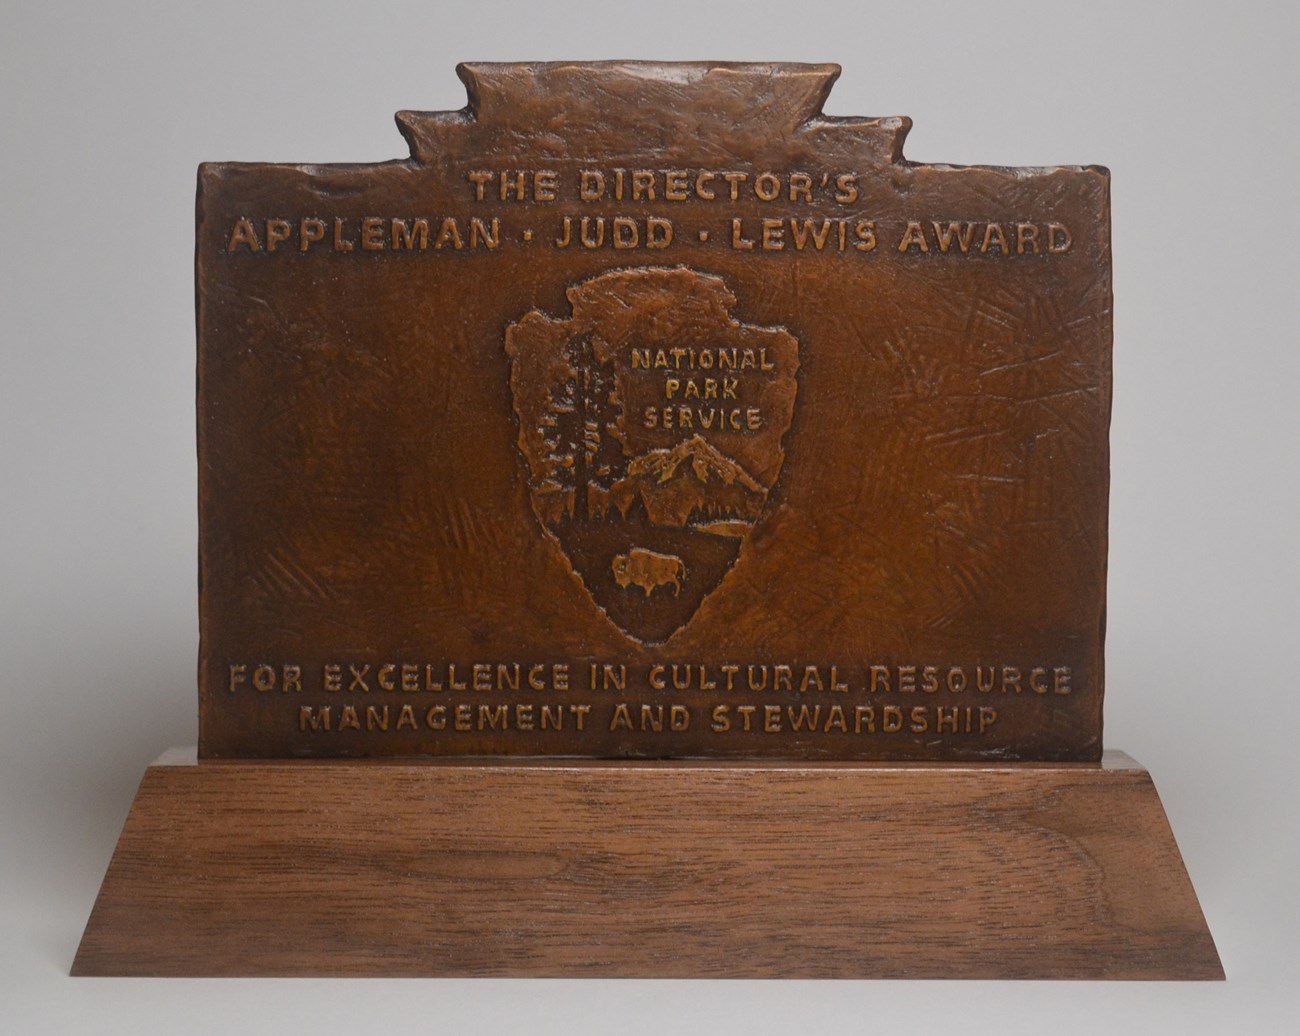 a statuette of a rectangular award with arrowhead logo and the Appleman Judd Lewis Award for excellence in cultural resource management and stewardship